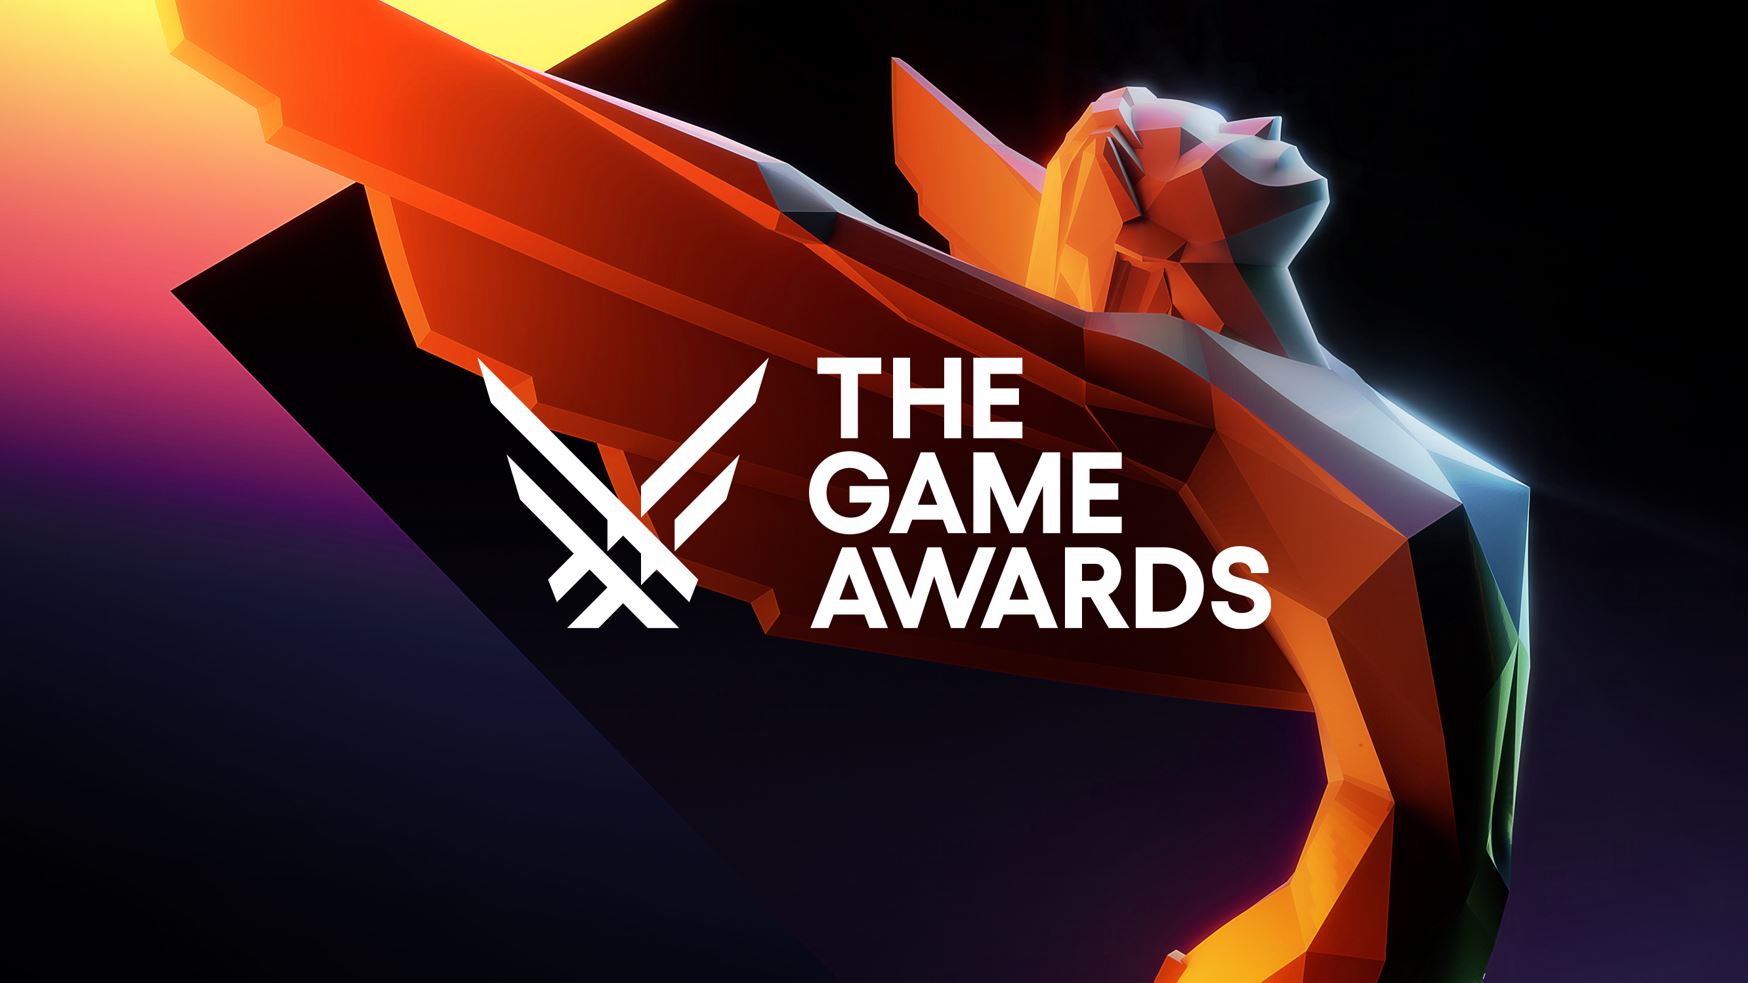 The Game Awards 2023: How to watch and what to expect